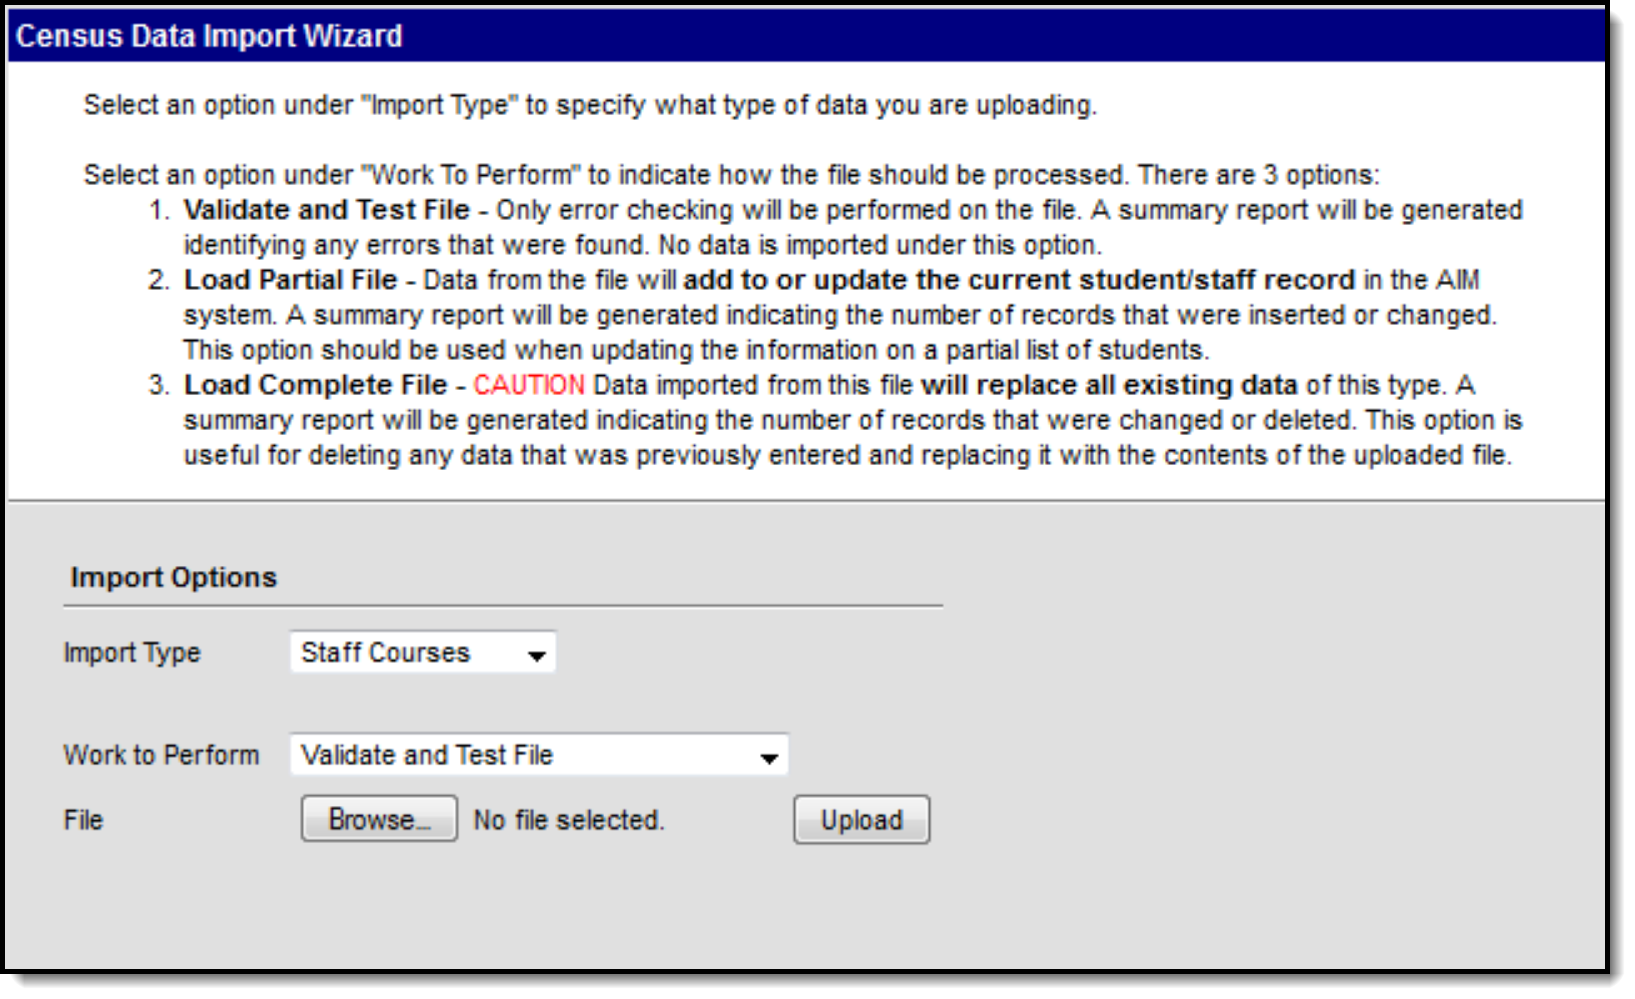 Screenshot of the Census Import Wizard